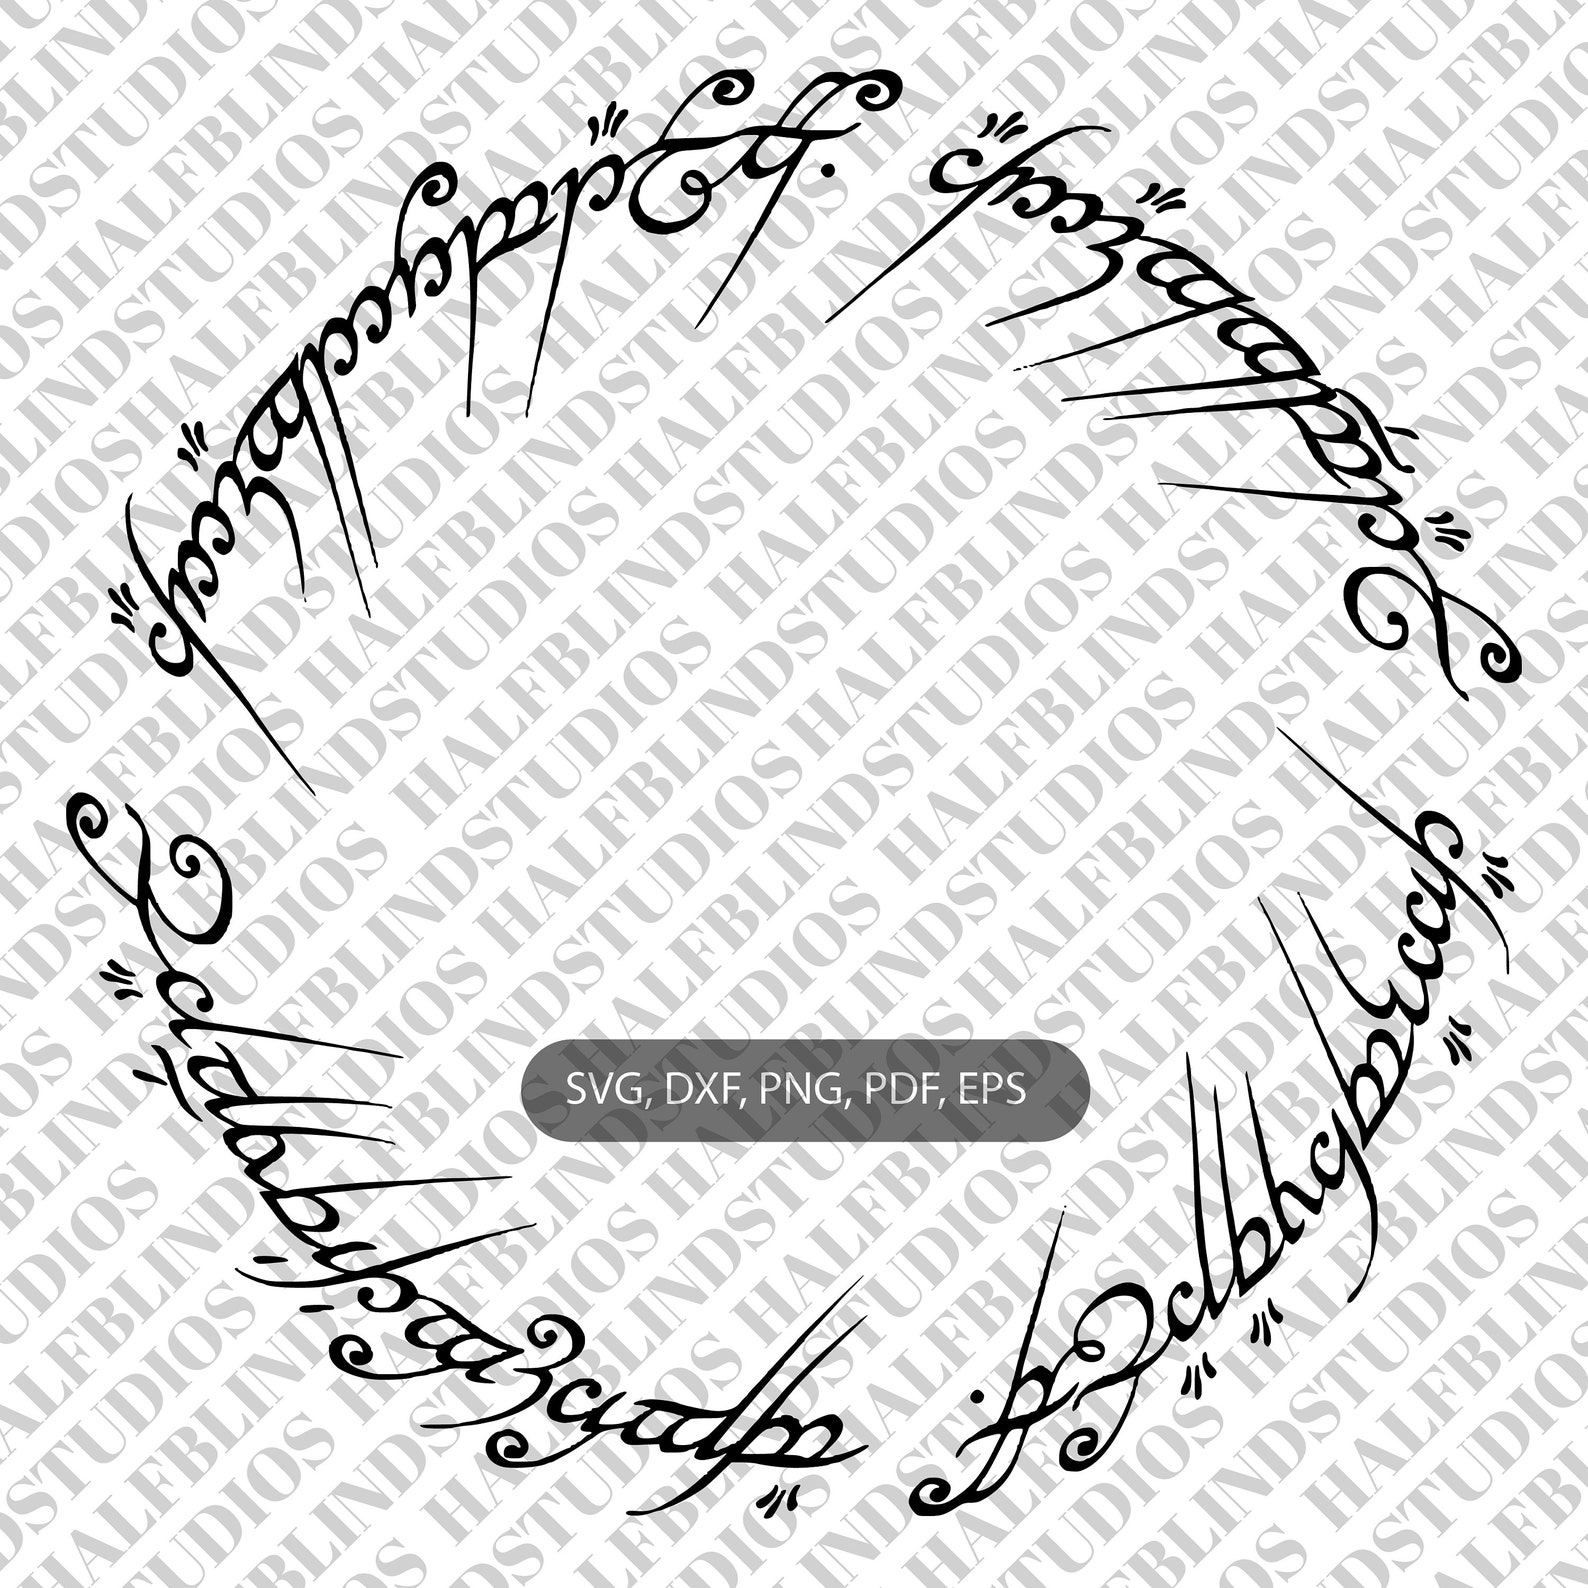 Lord of the Rings inscription svg dxf png digital download | Etsy